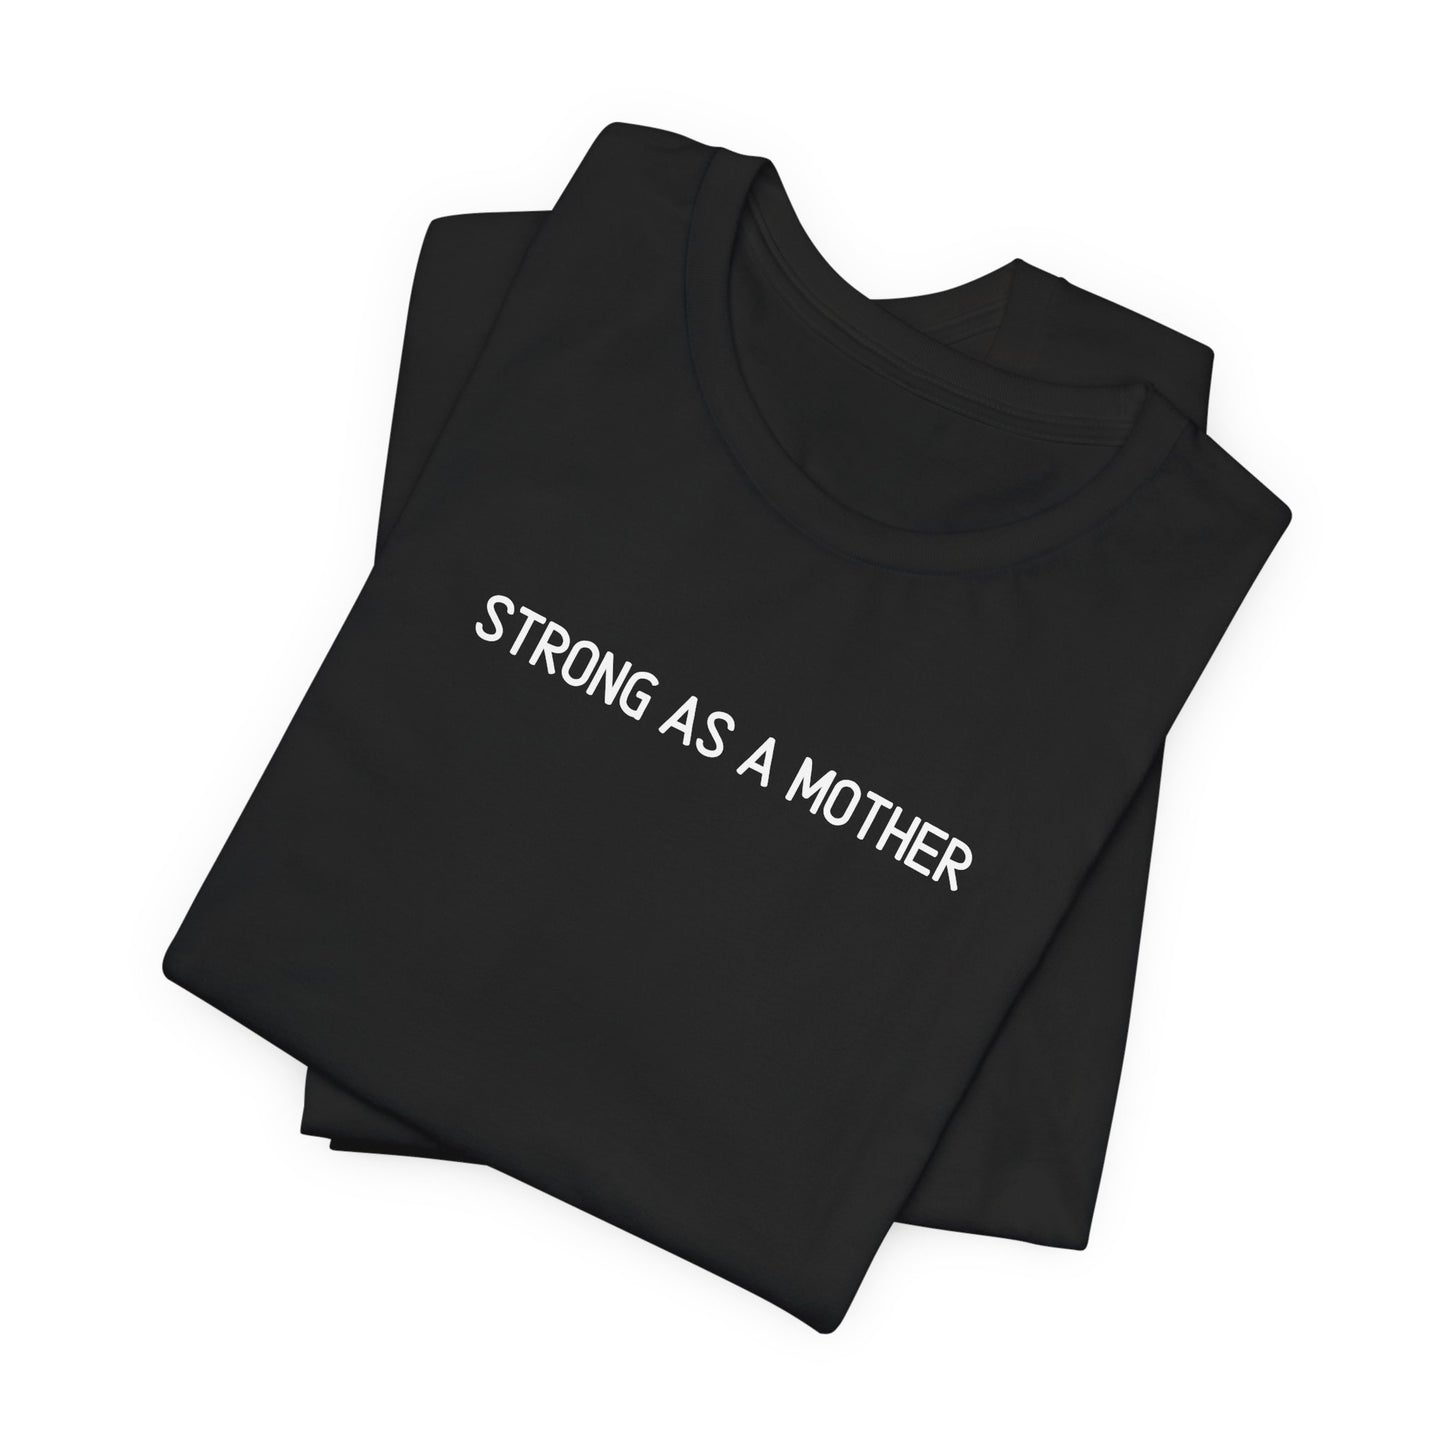 Strong as a Mother Tee